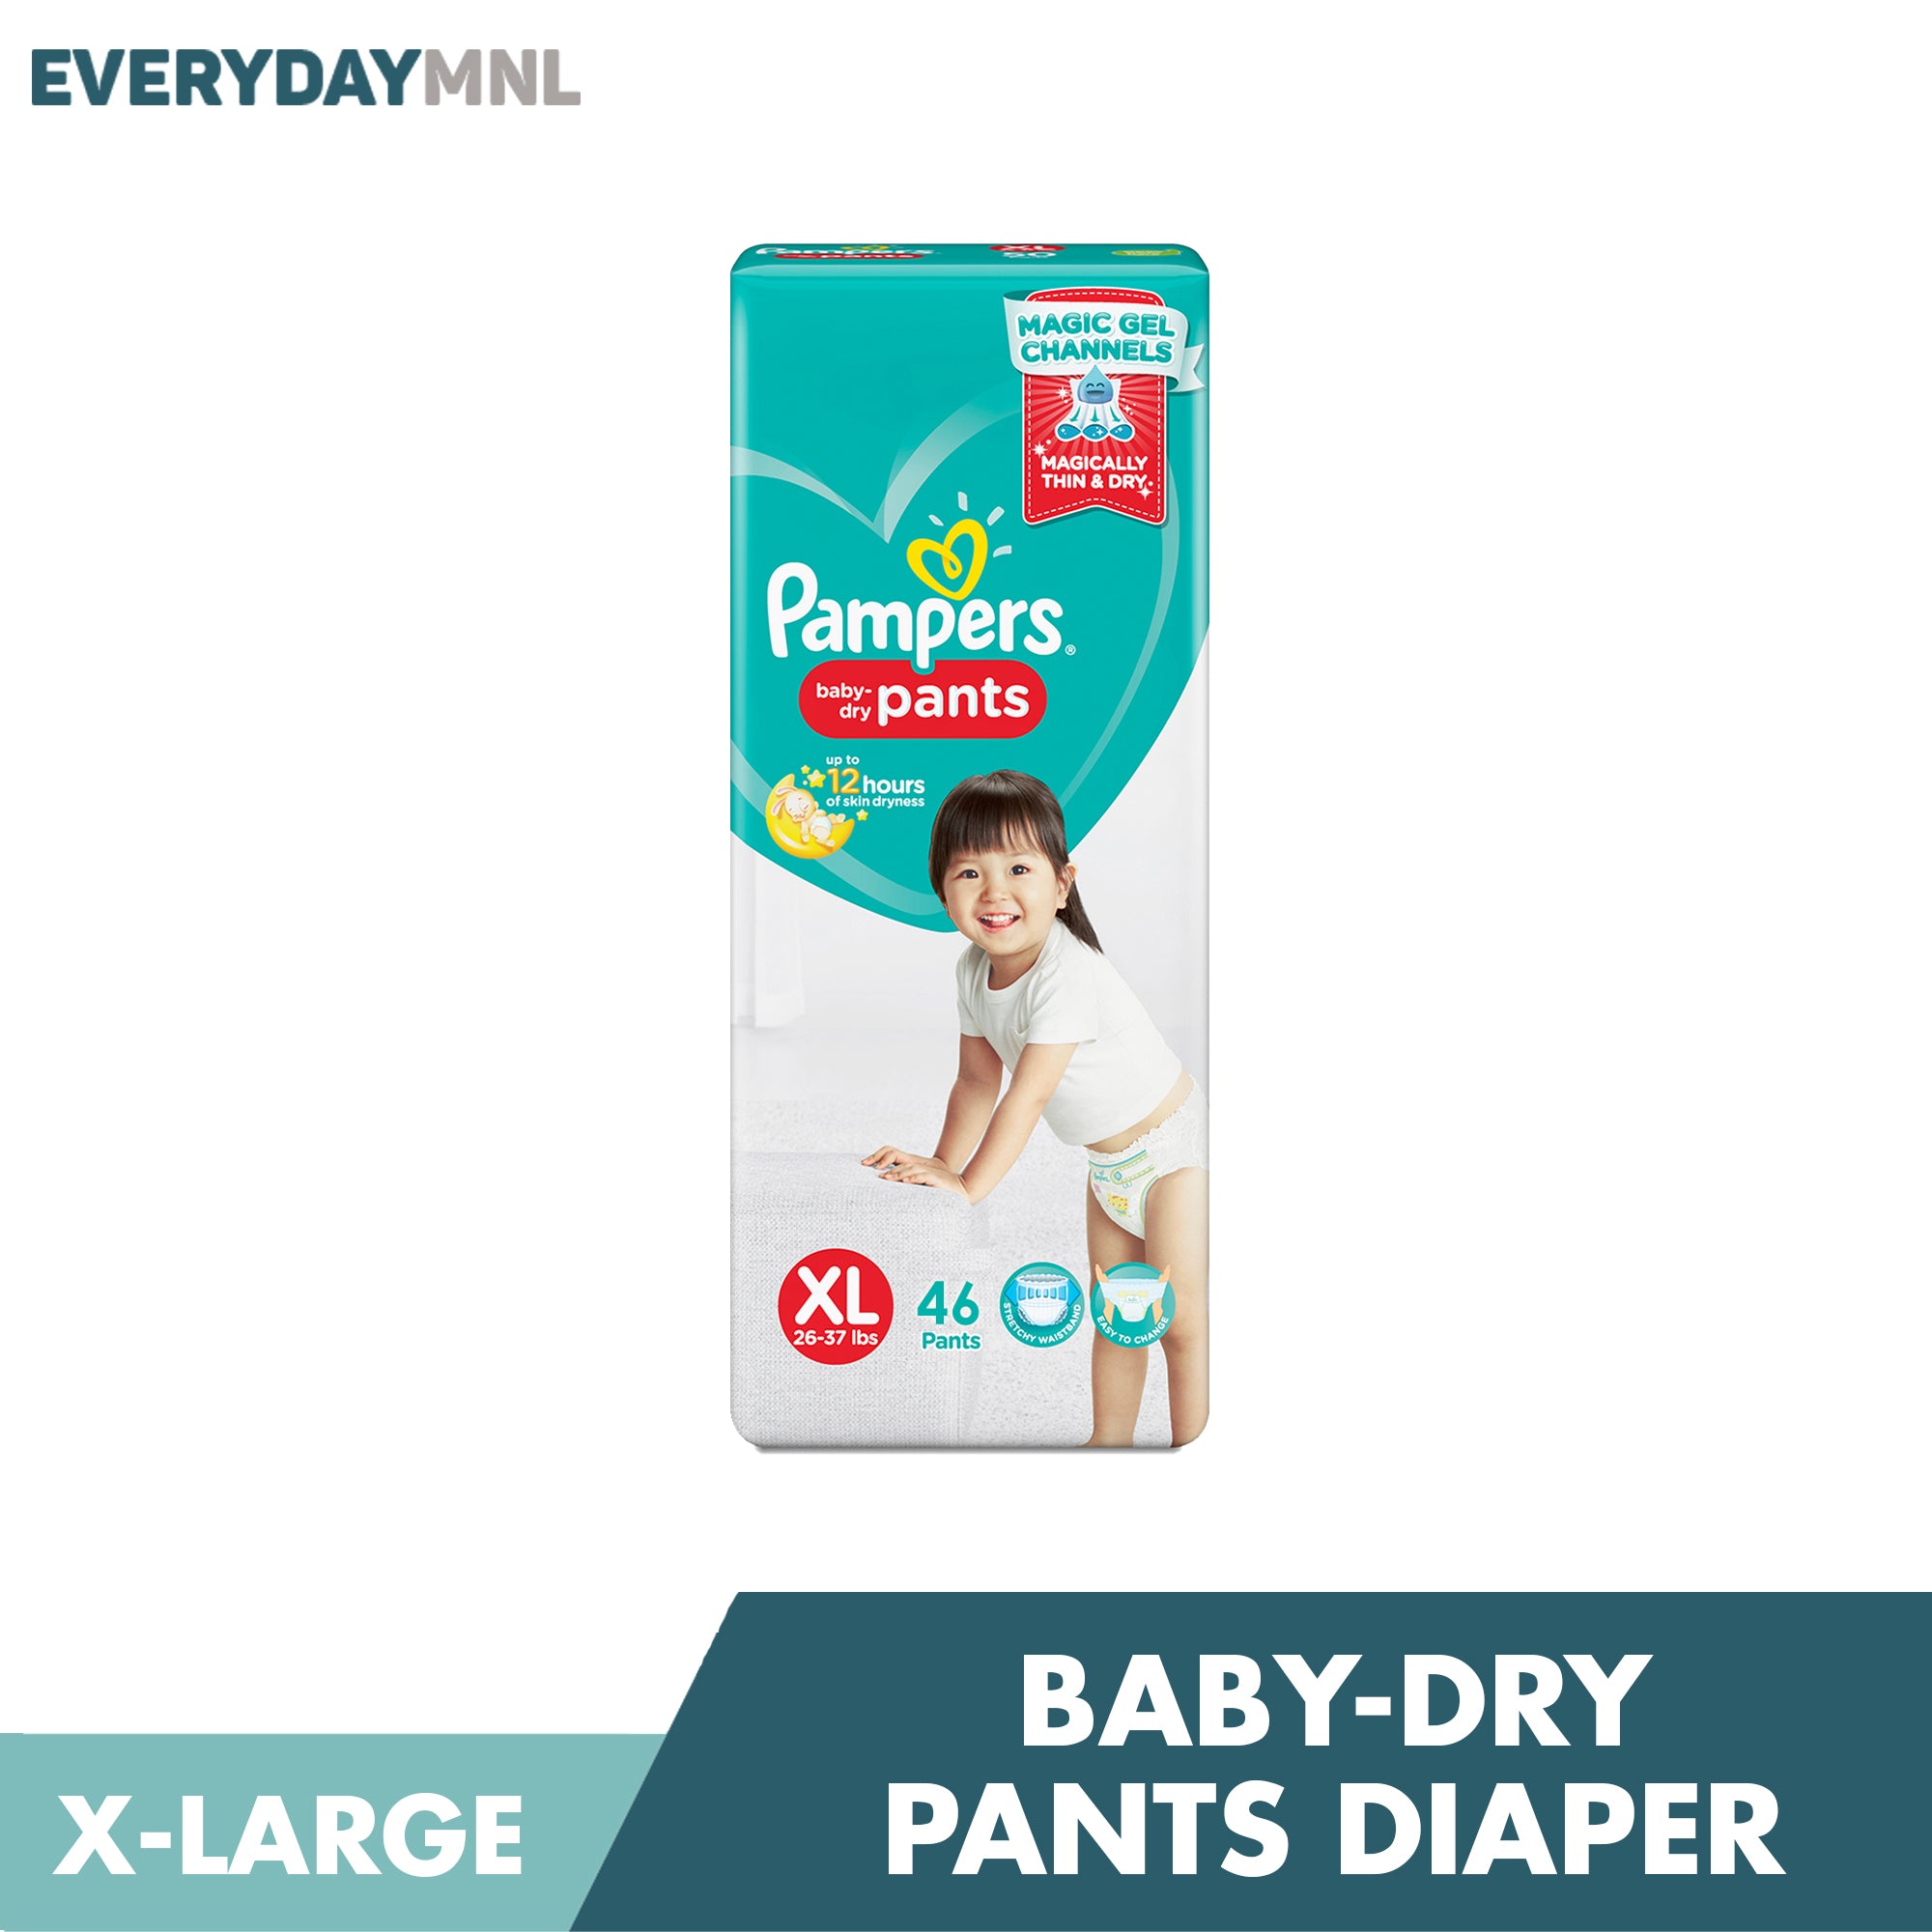 pampers pants xl